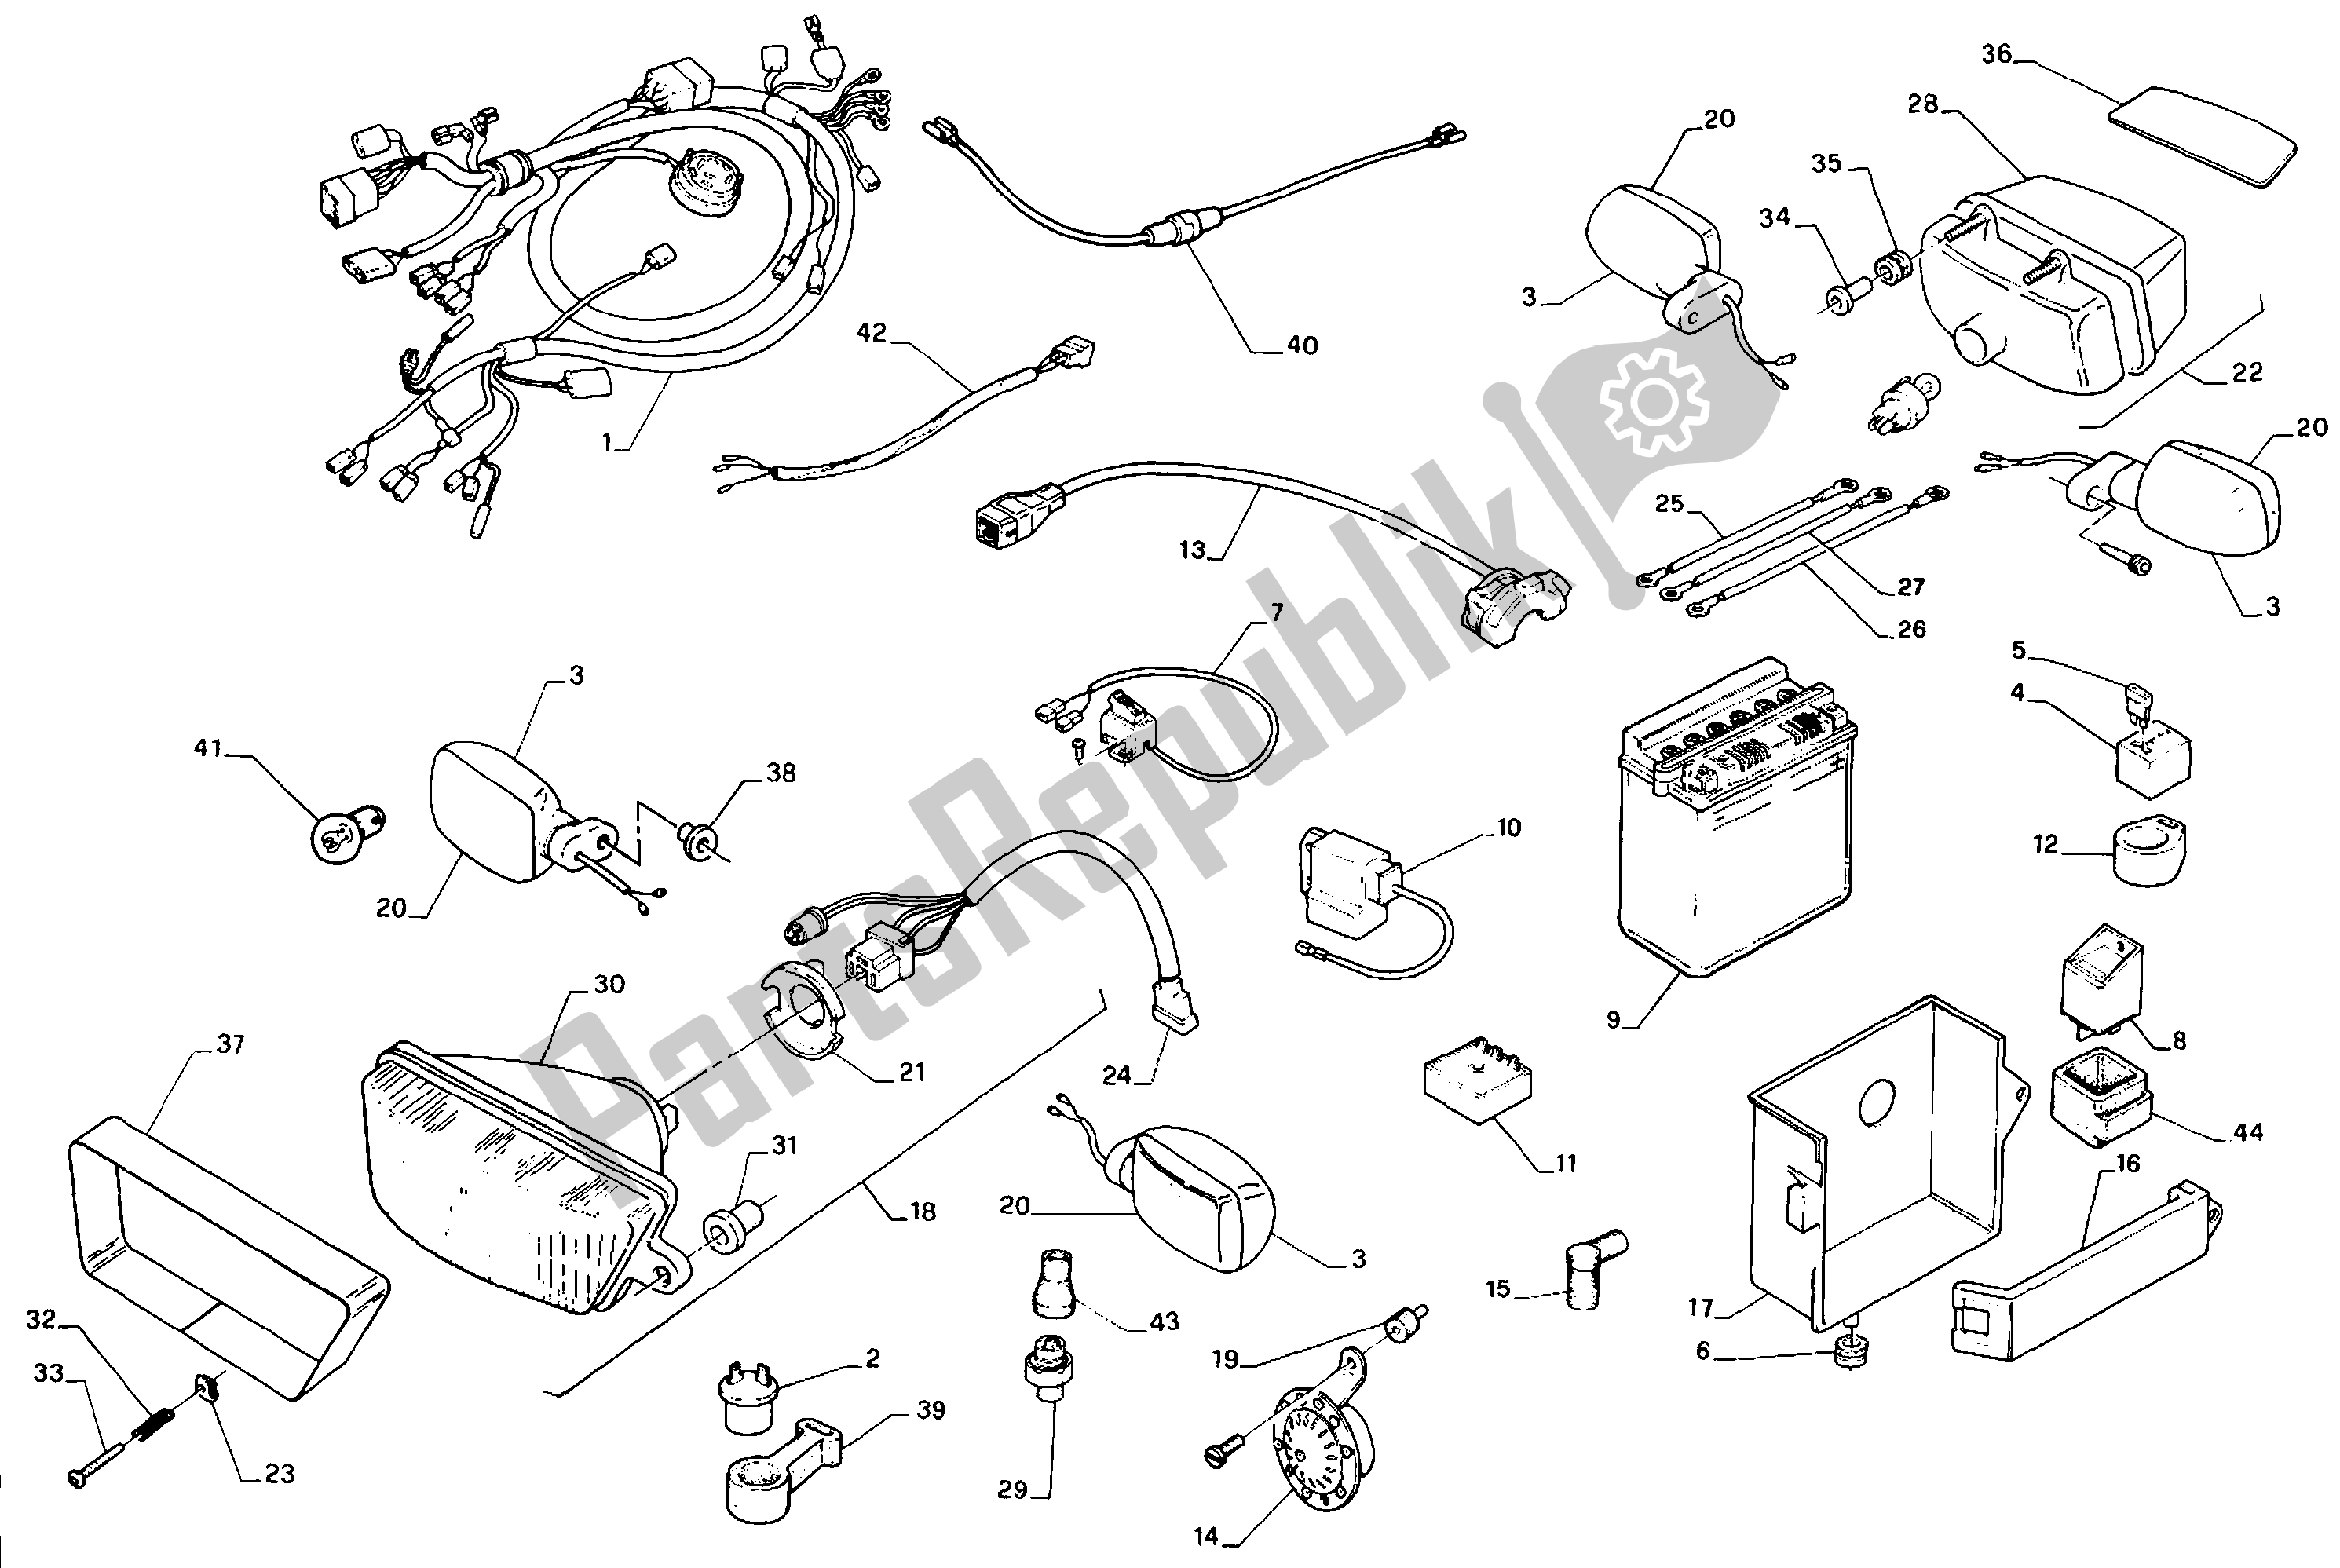 All parts for the Electrical System of the Aprilia AF1 50 1991 - 1992